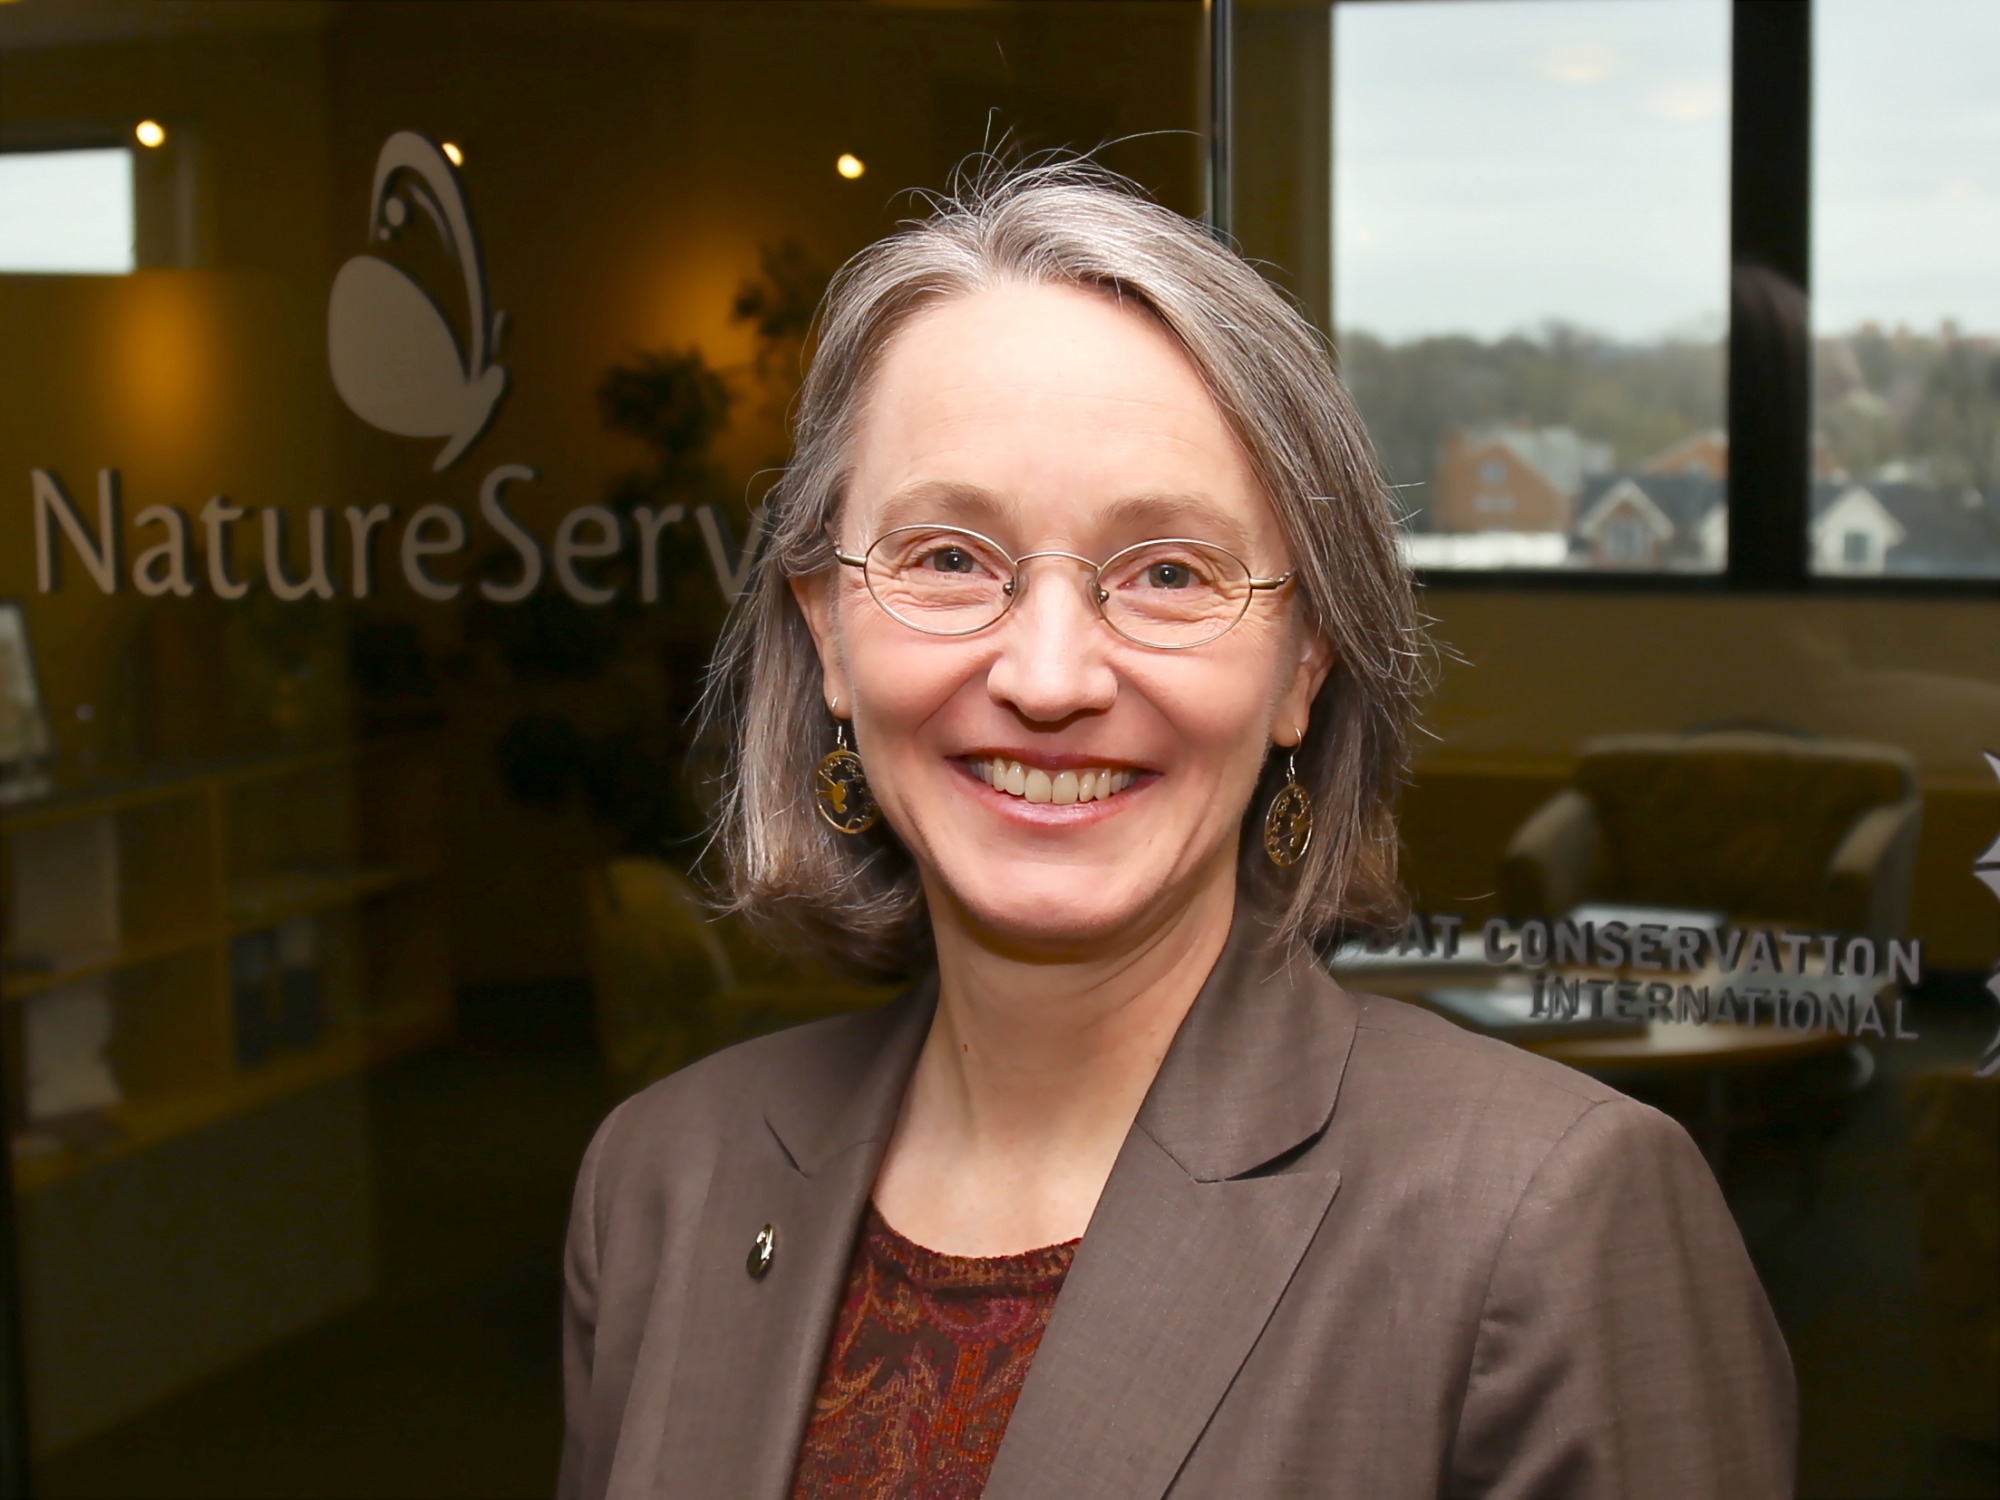 NatureServe President & CEO Mary Klein